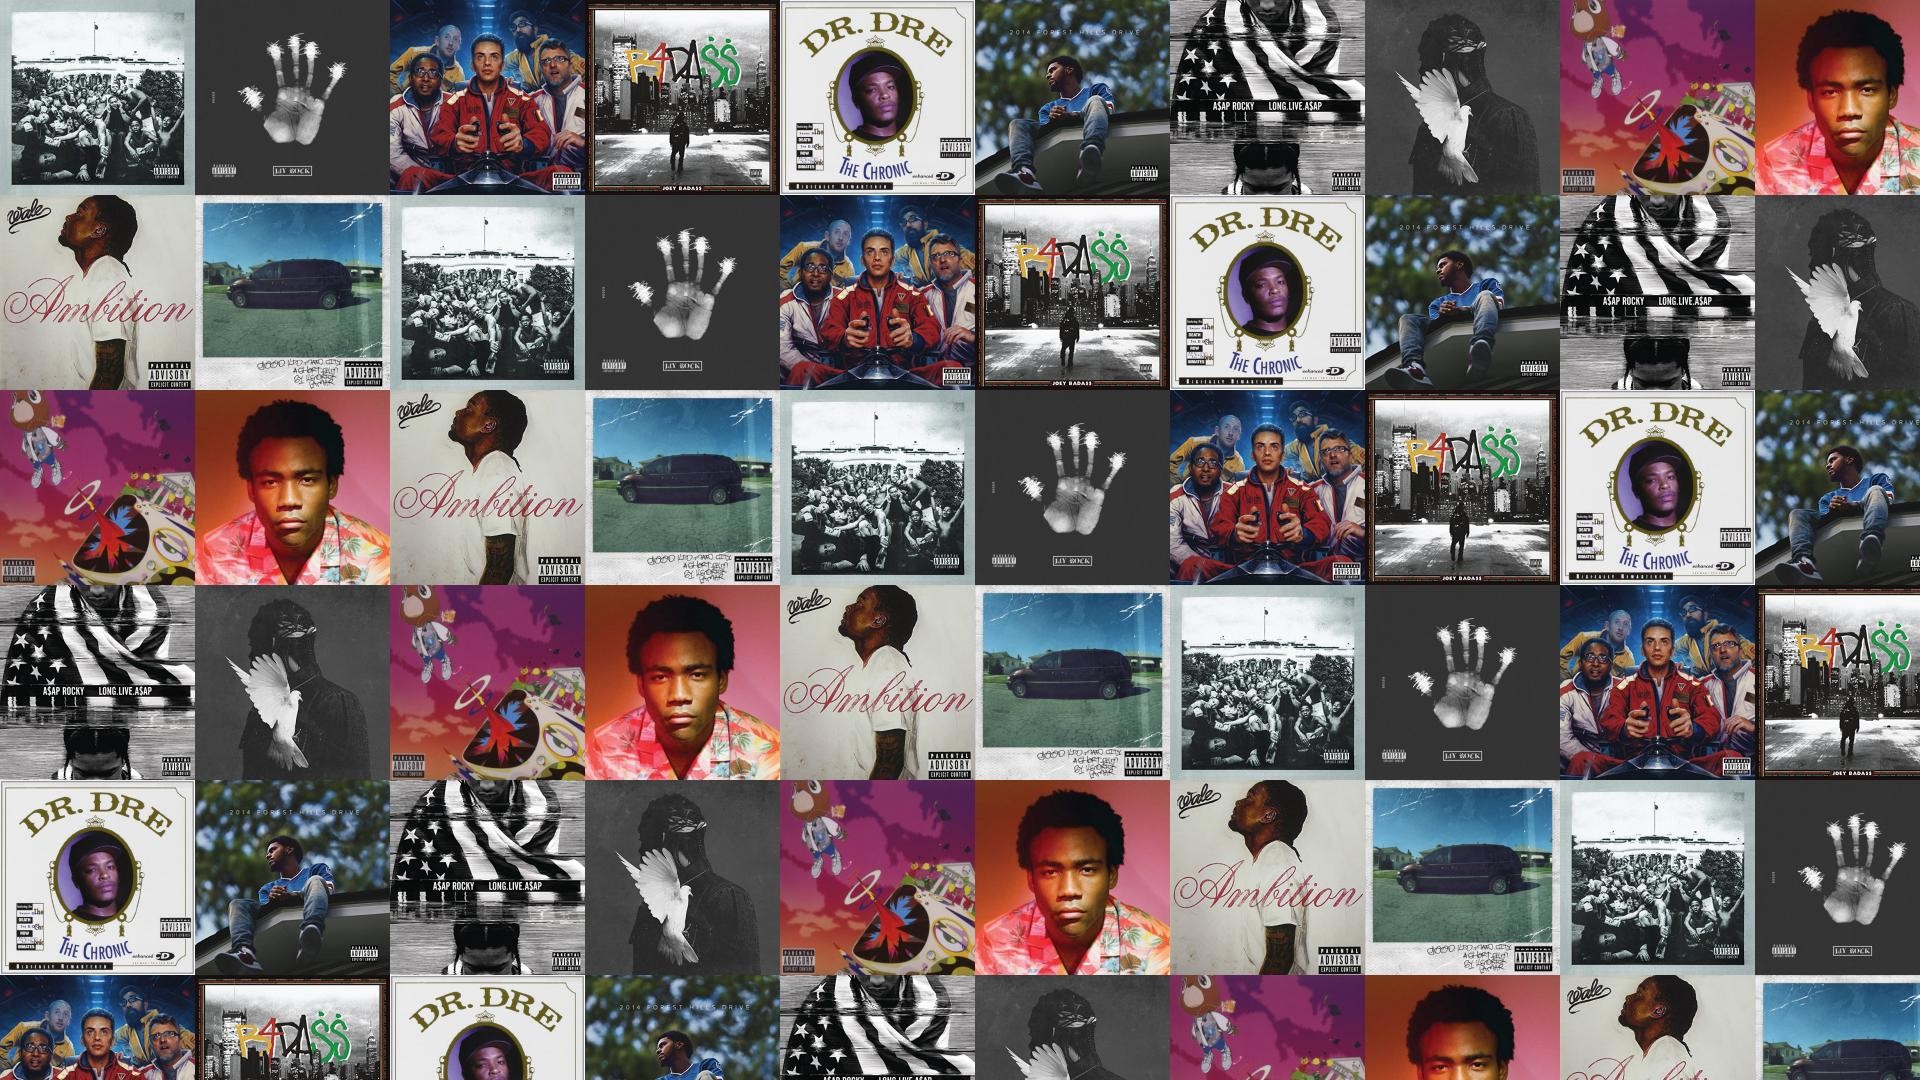 1920x1080 Download this free wallpaper with images of Kendrick Lamar – To Pimp A  Butterfly, Jay Rock – 90059, Logic – The Incredible True Story, Joey Badass  – Badass, ...